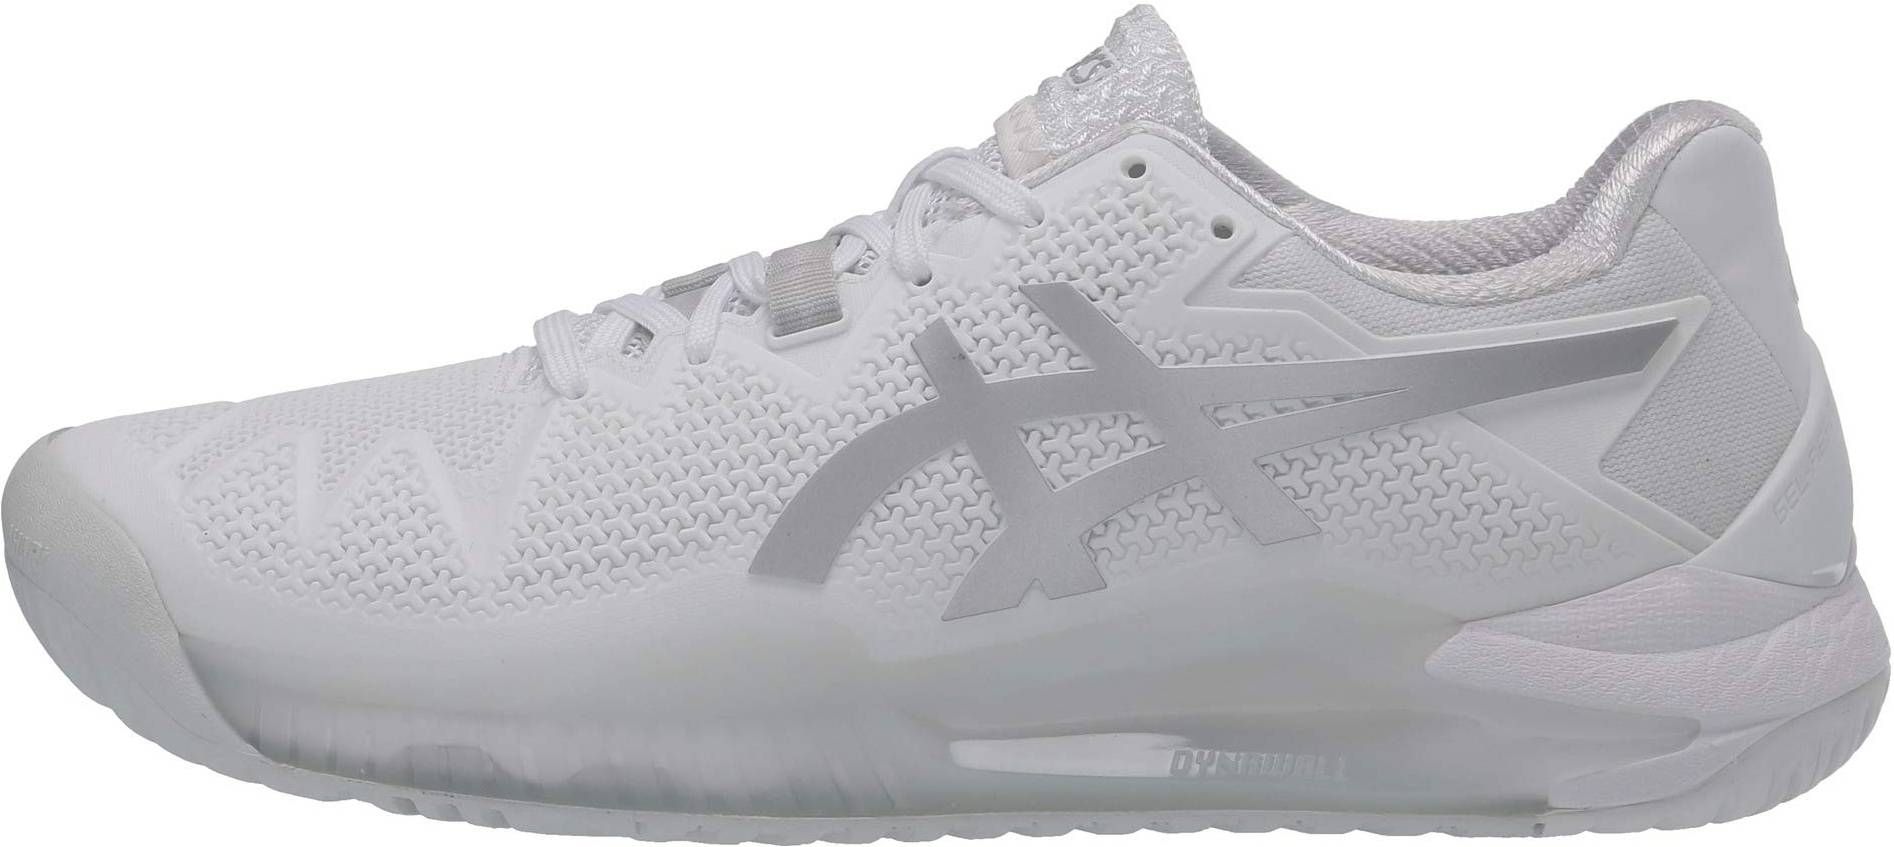 5 ASICS Gel Resolution tennis shoes: Save up to 49% | RunRepeat